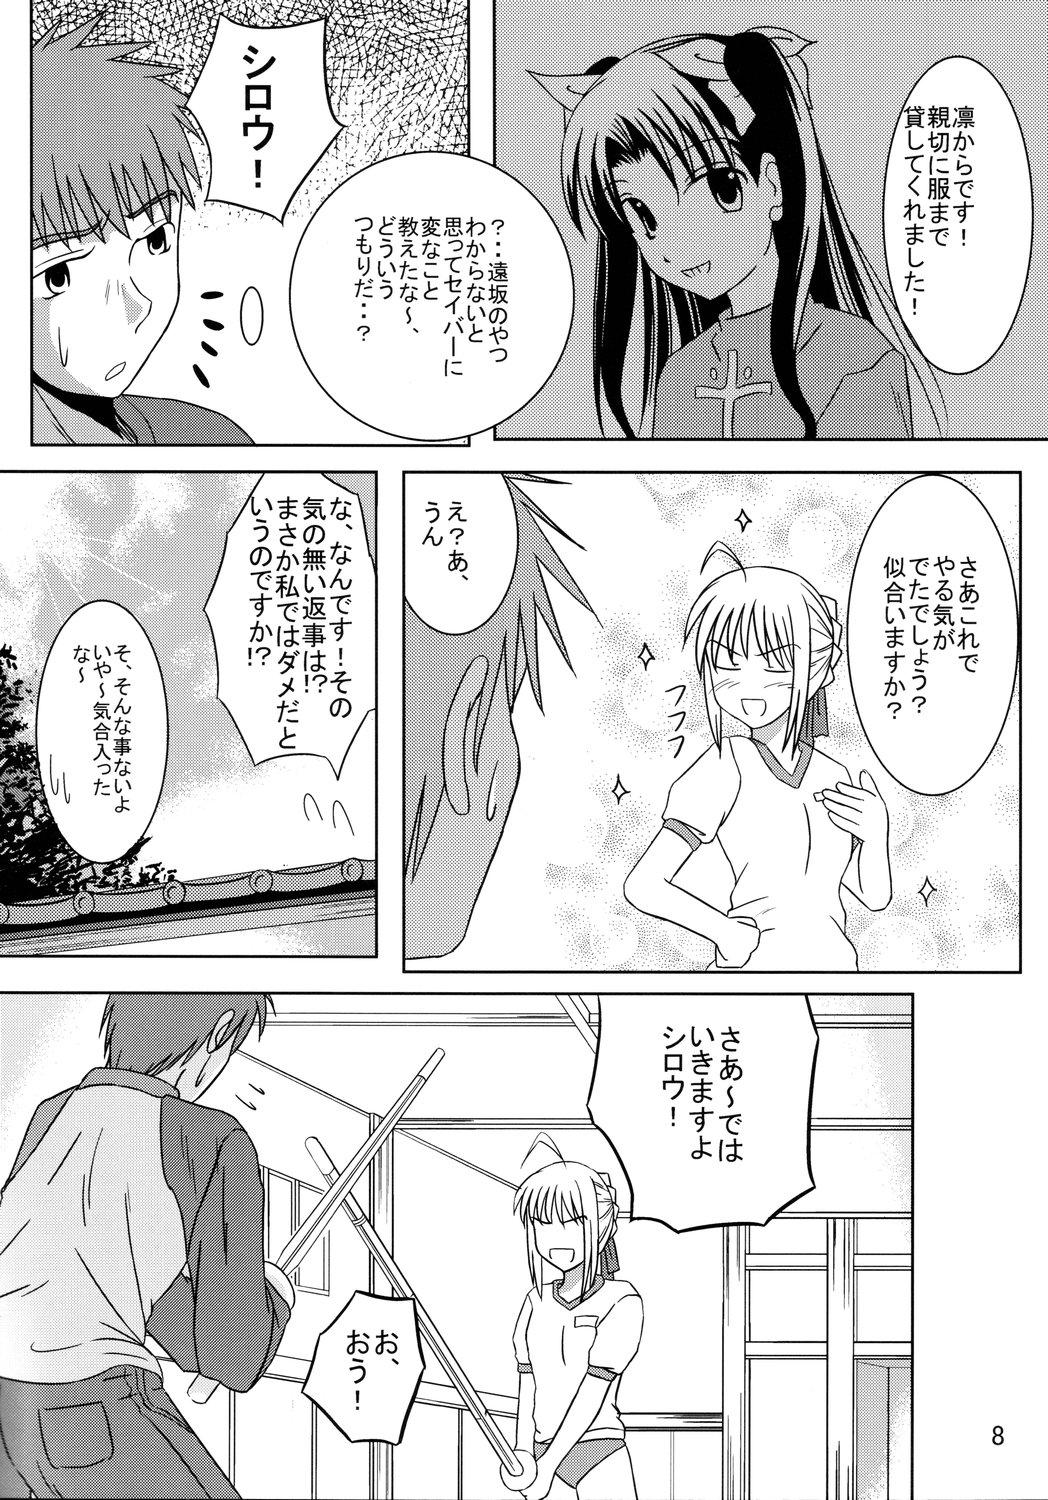 Bisex Saber Of Sanity - Fate stay night Handsome - Page 7